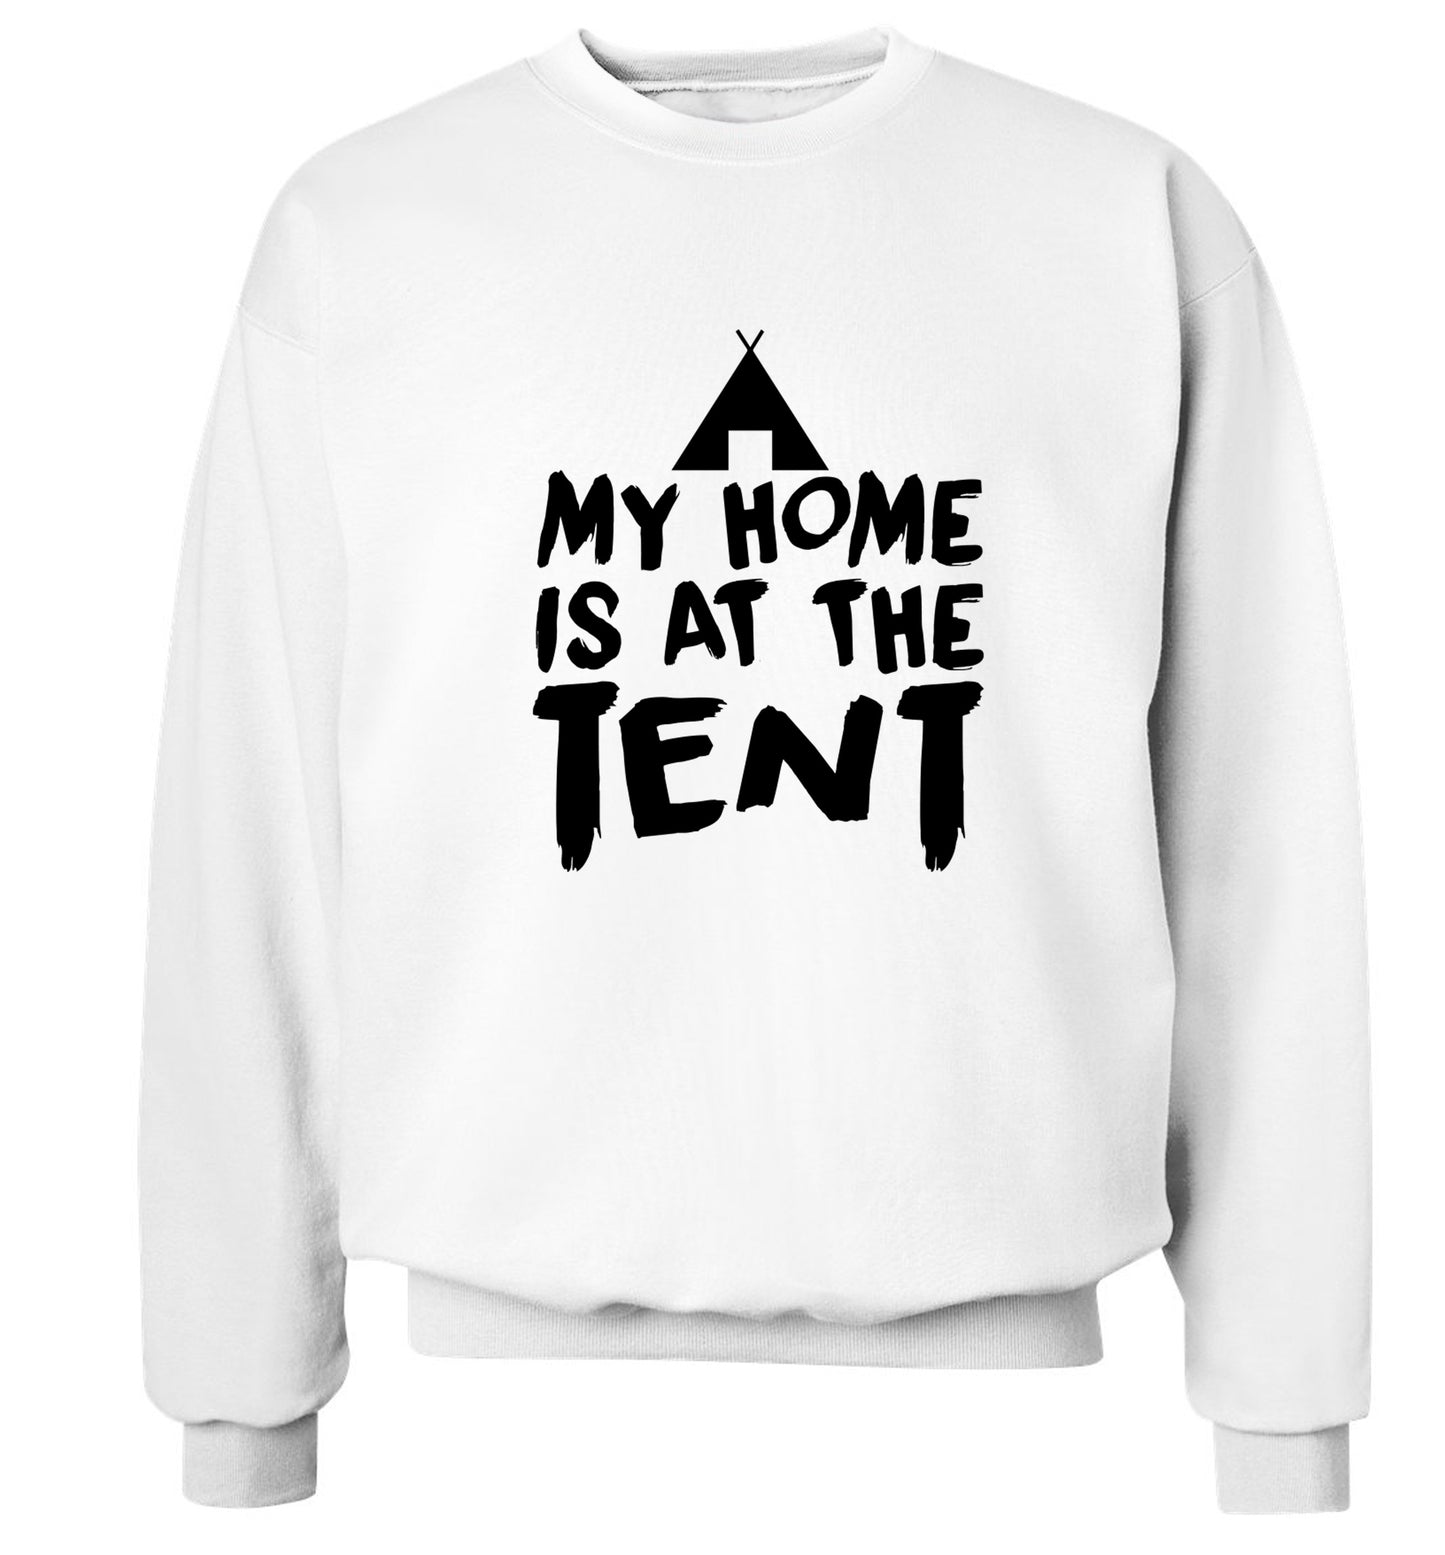 My home is at the tent Adult's unisex white Sweater 2XL